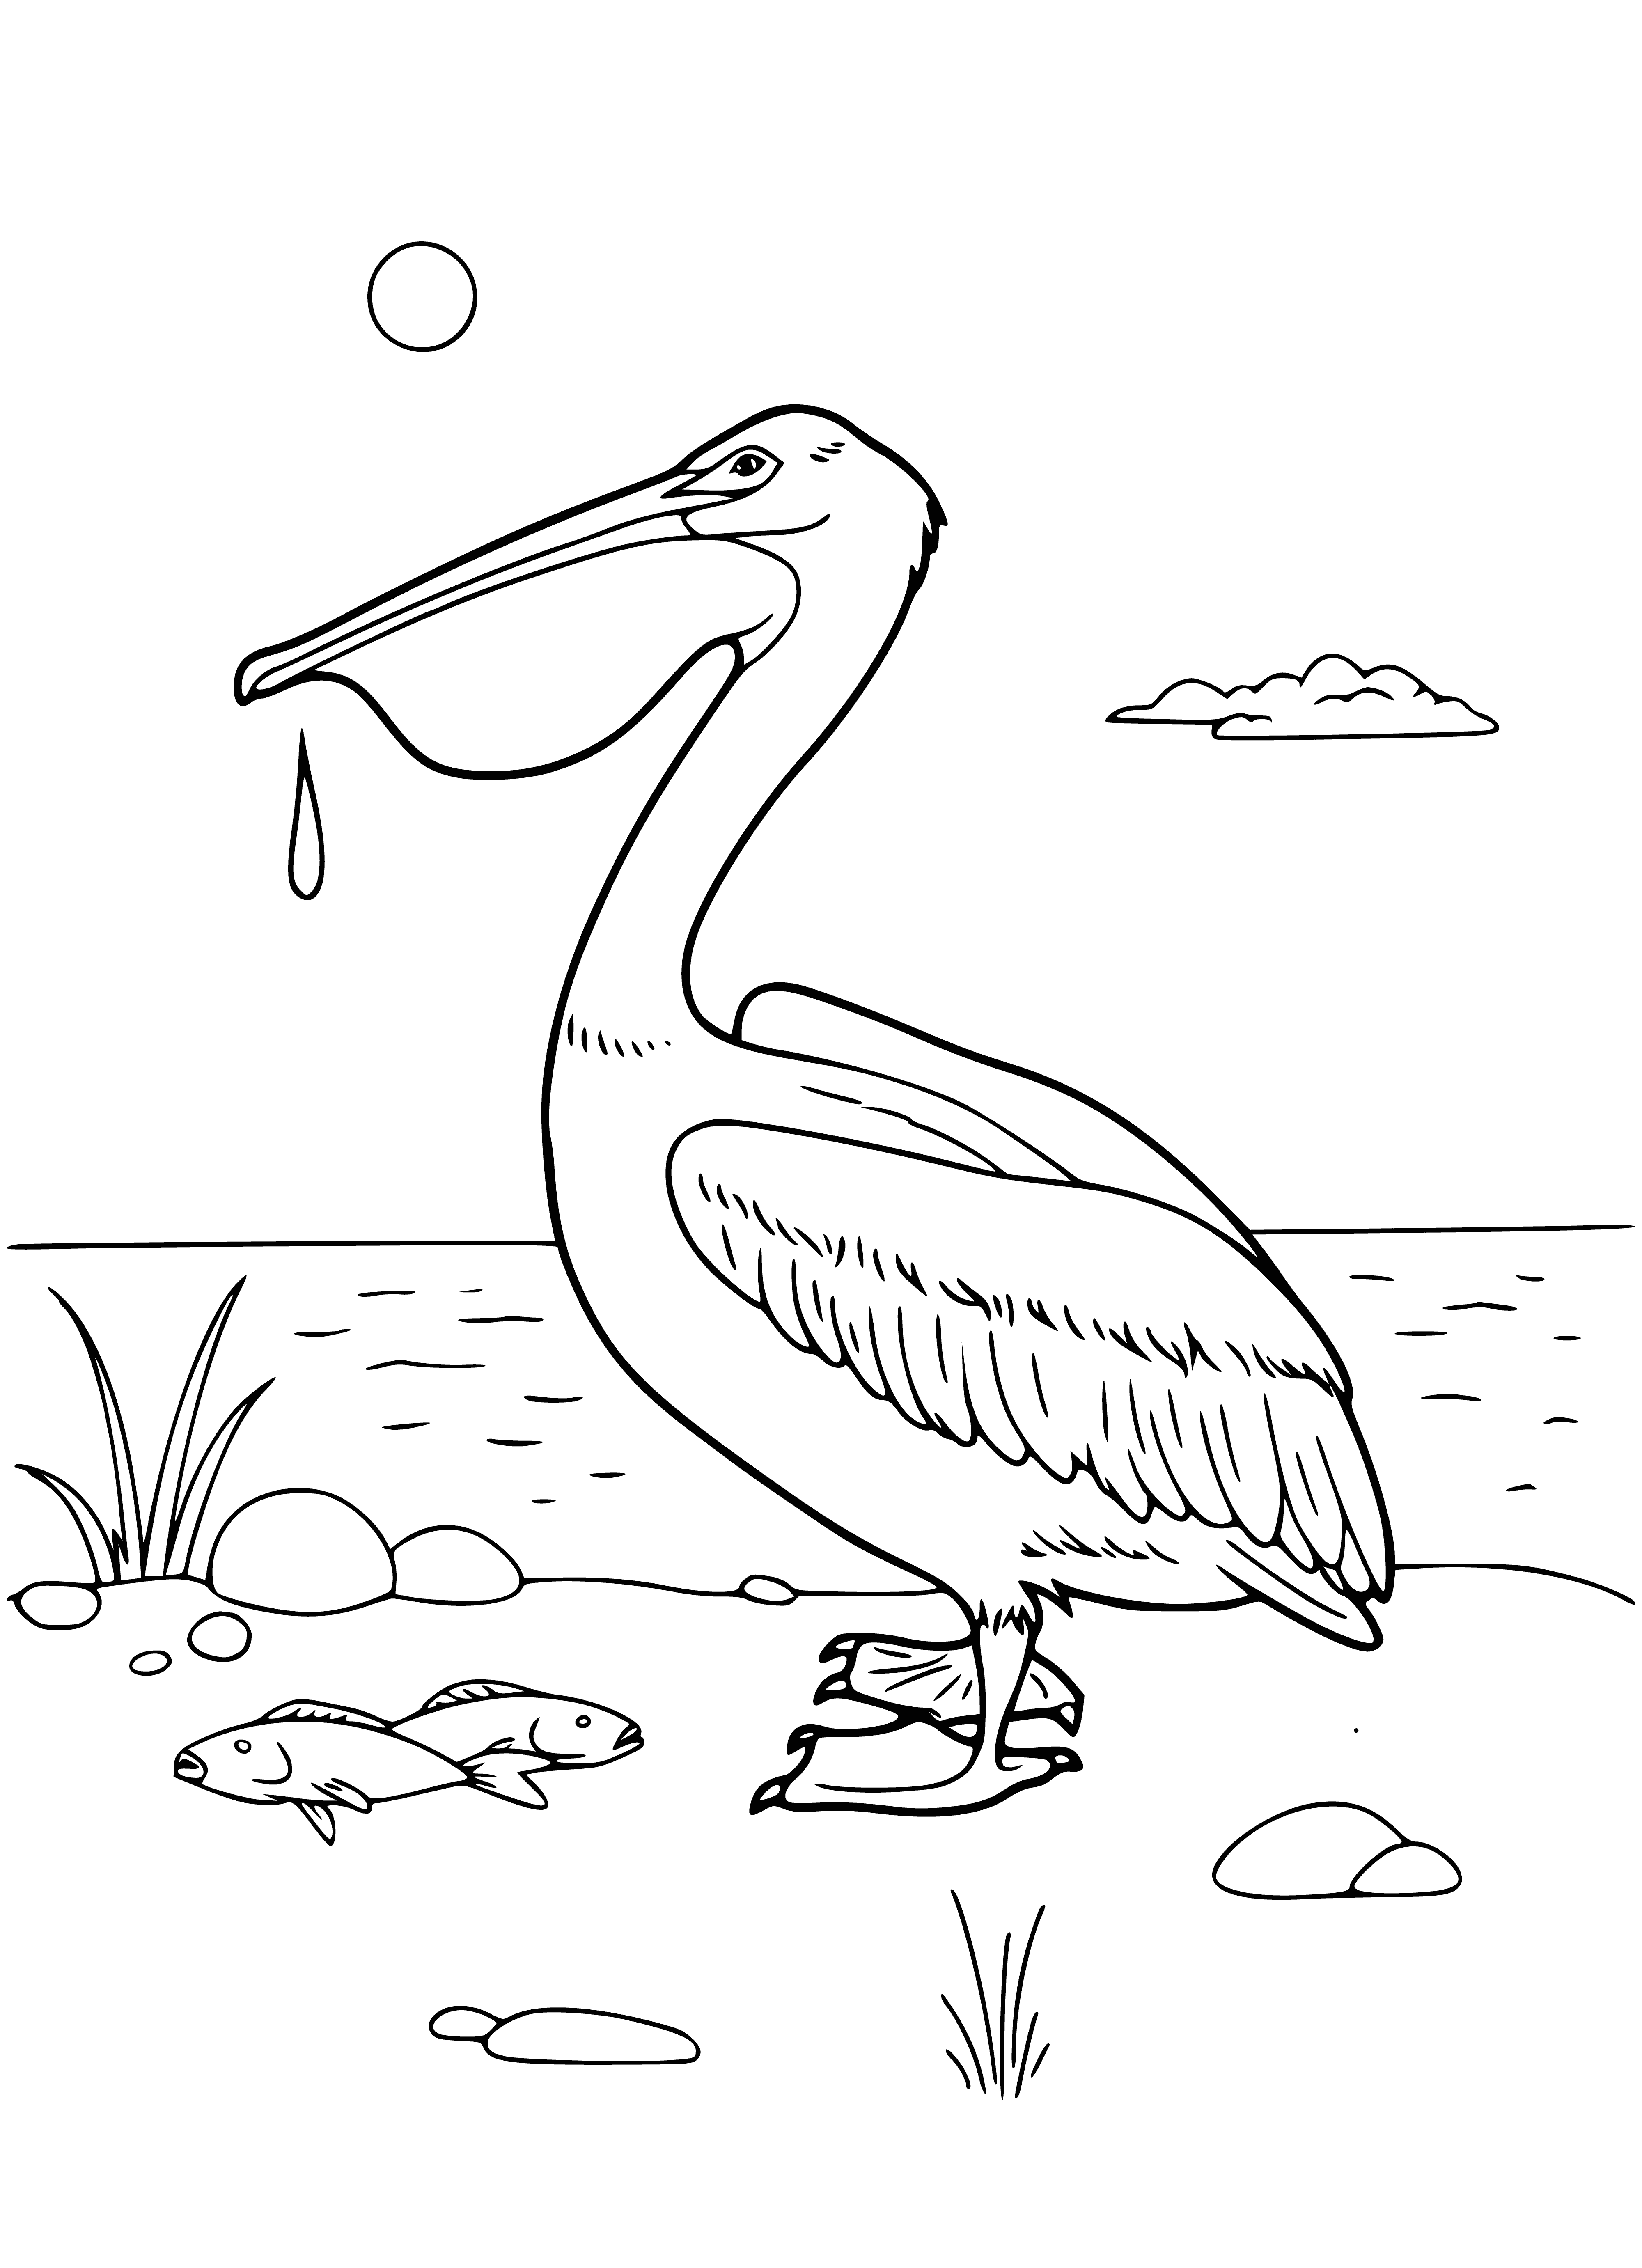 coloring page: Large bird on rocky outcropping with curved bill and webbed feet. White plumage with grey wings and back plus pouched bill for scooping fish.